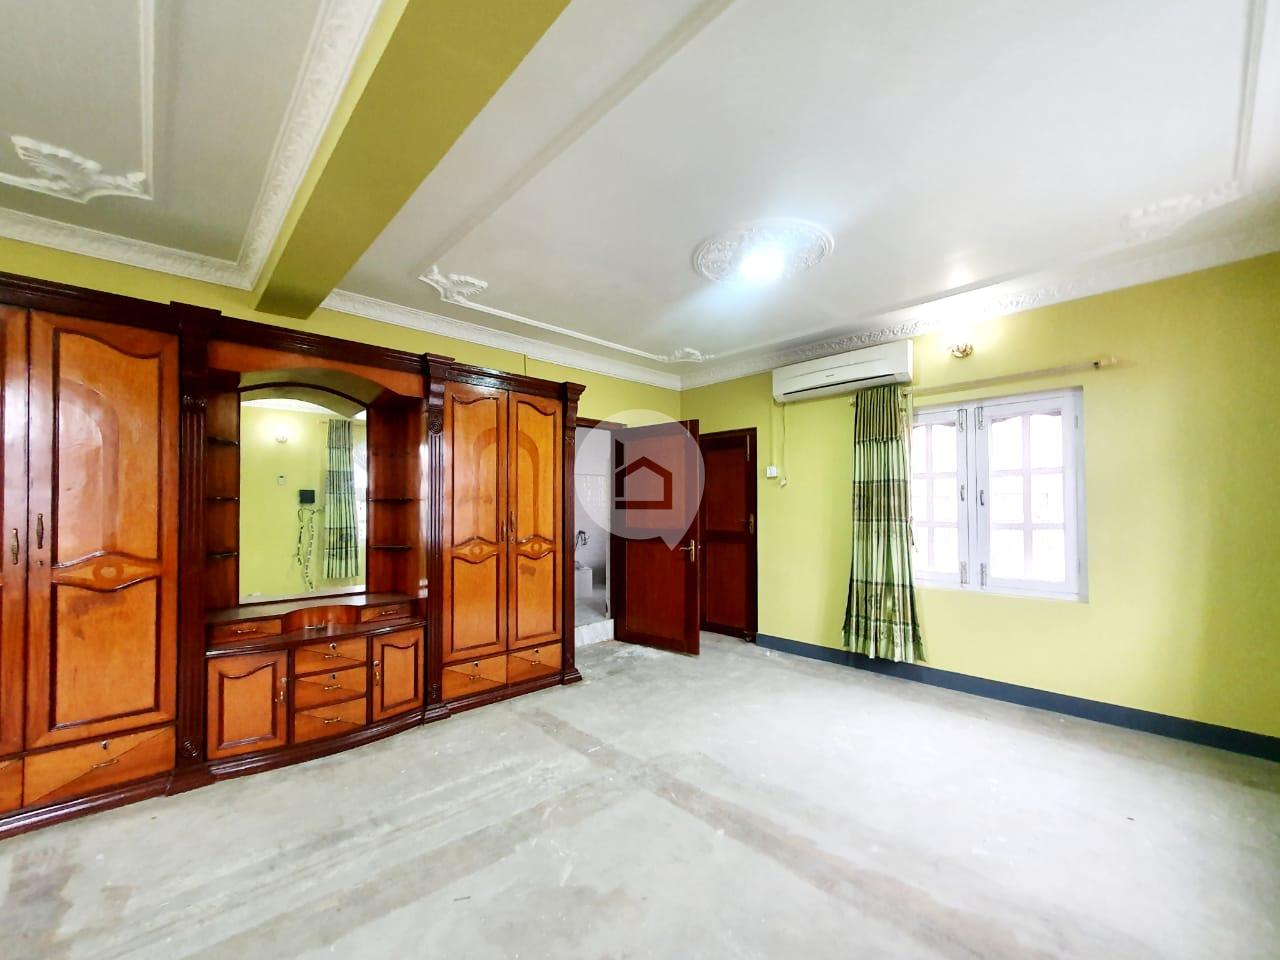 House for Rent in Sanepa, Lalitpur Image 3